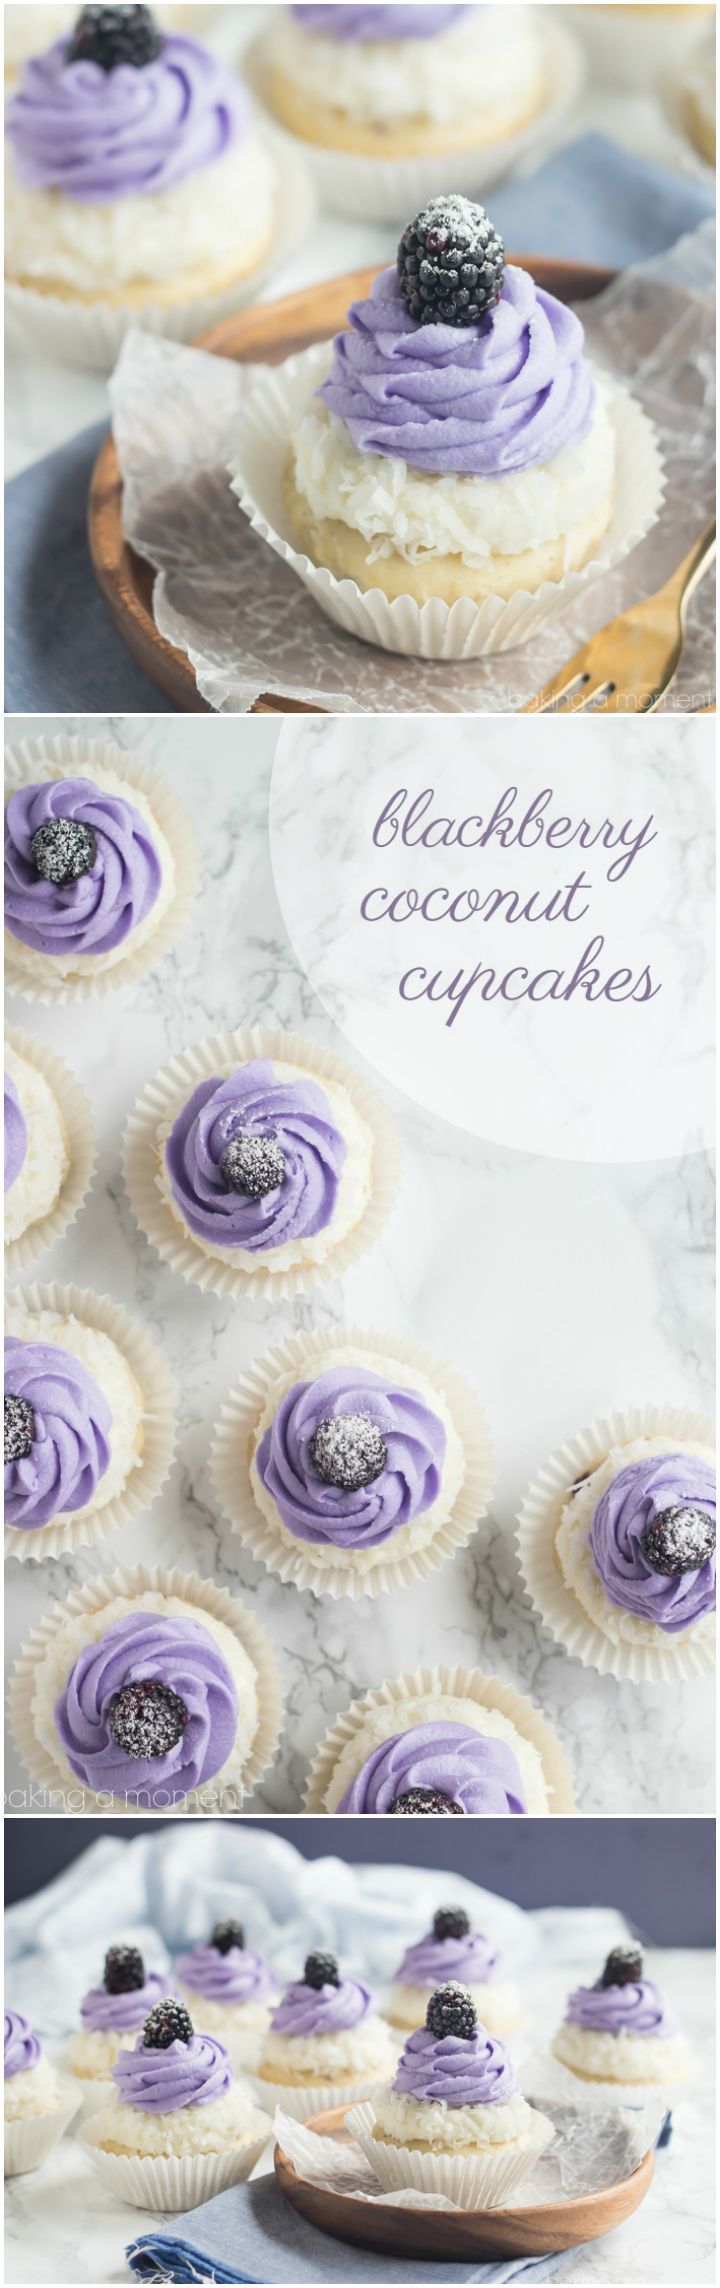 Blackberry Coconut Cupcakes- oh my! So dreamy and light, and that blackberry filling was such a fun surprise! ~